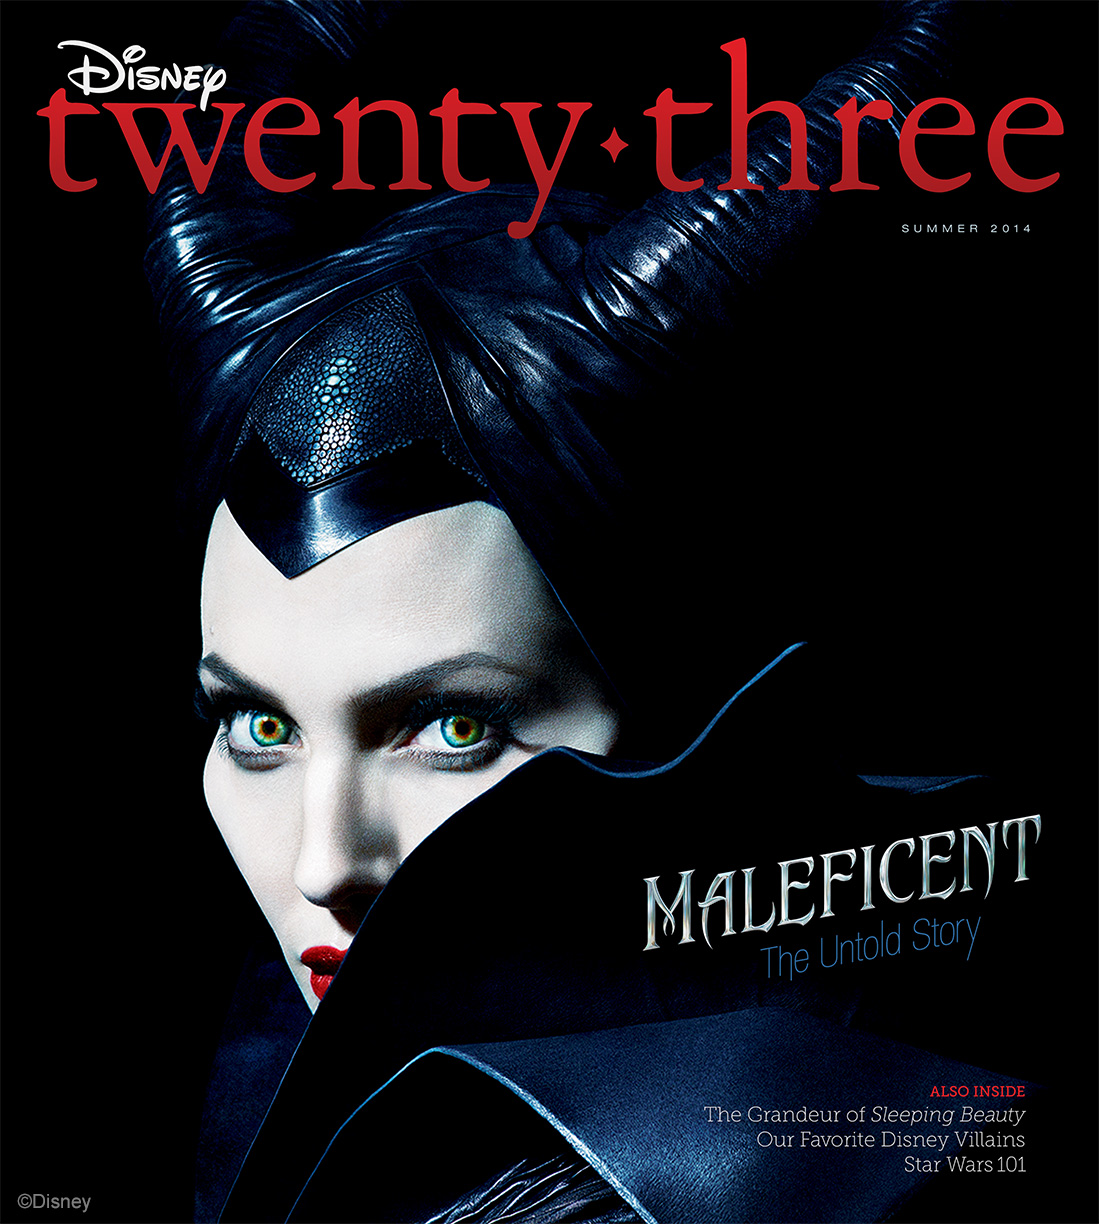 “Maleficent” Makes the Cover of the D23 Summer Issue